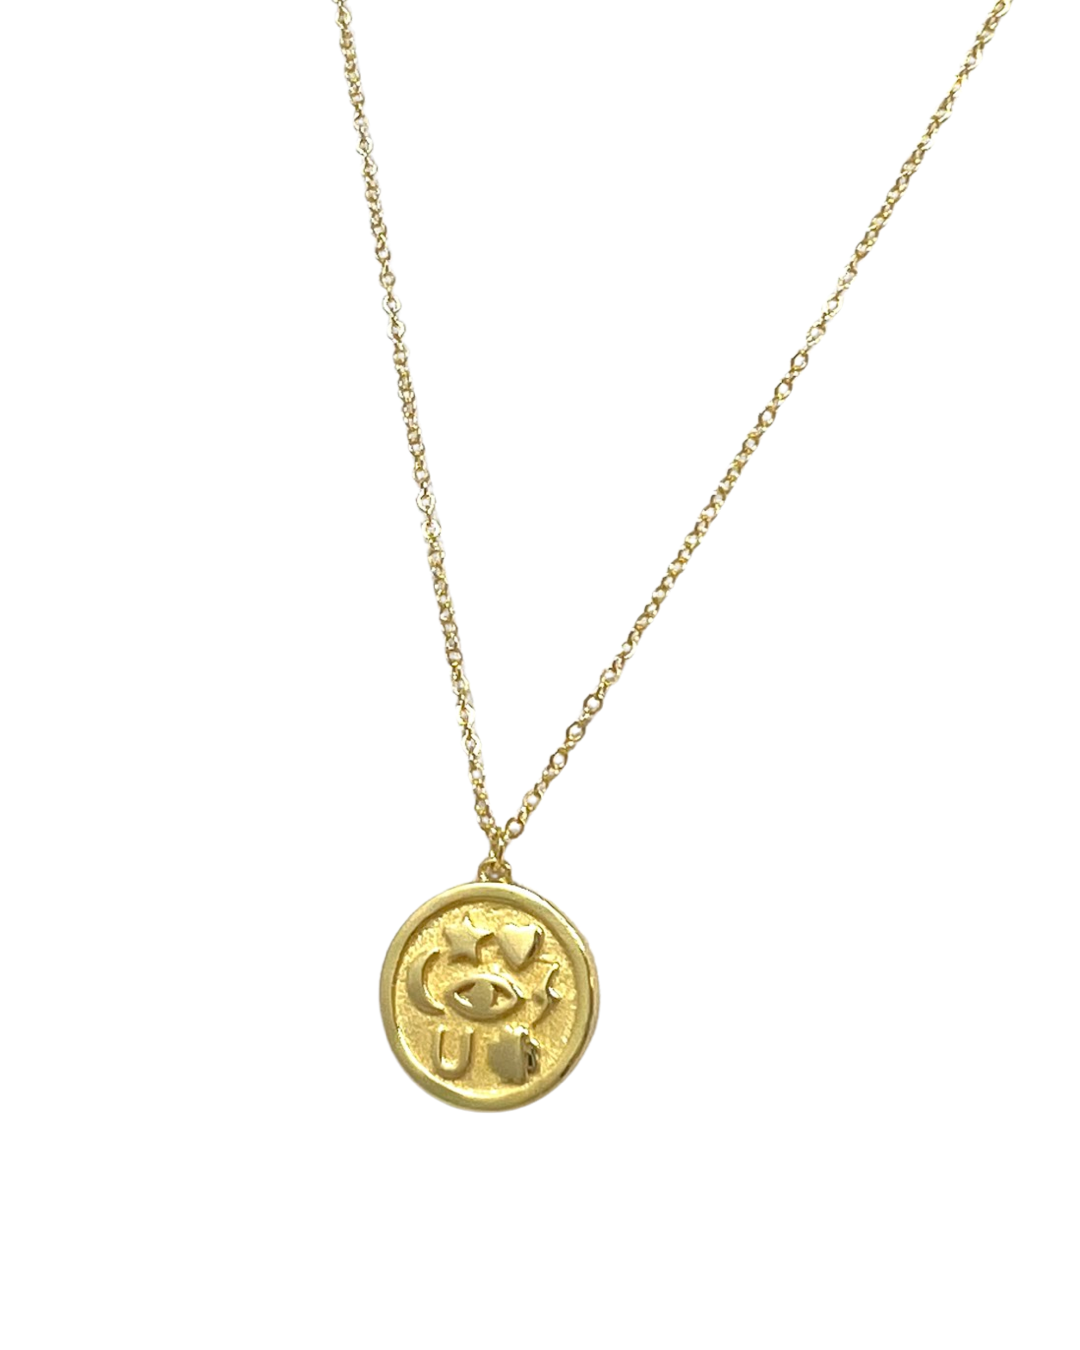 Union Necklace in Gold